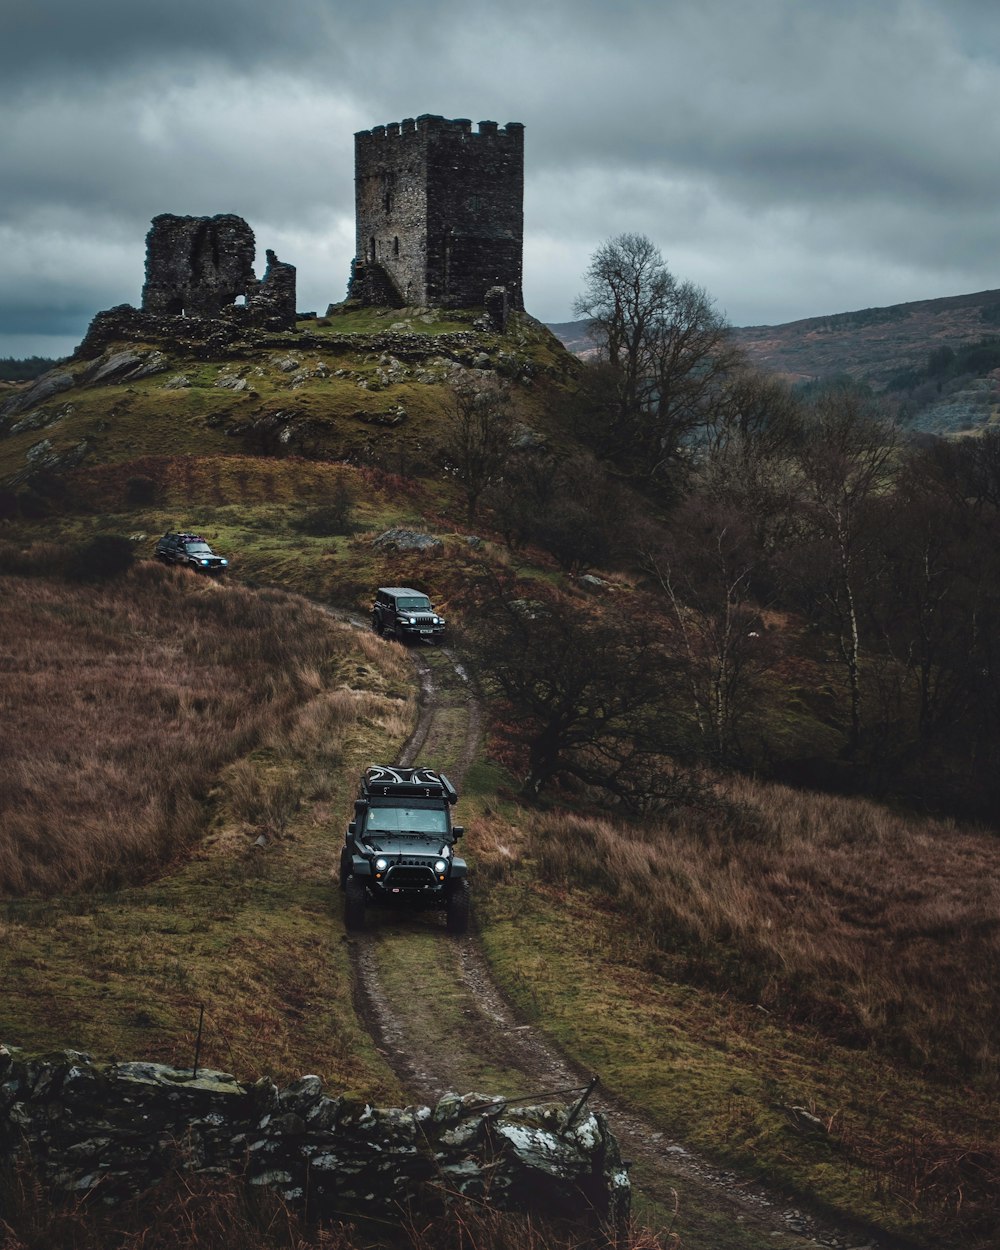 vehicles on road viewing brown ruin castle under white and gray sky